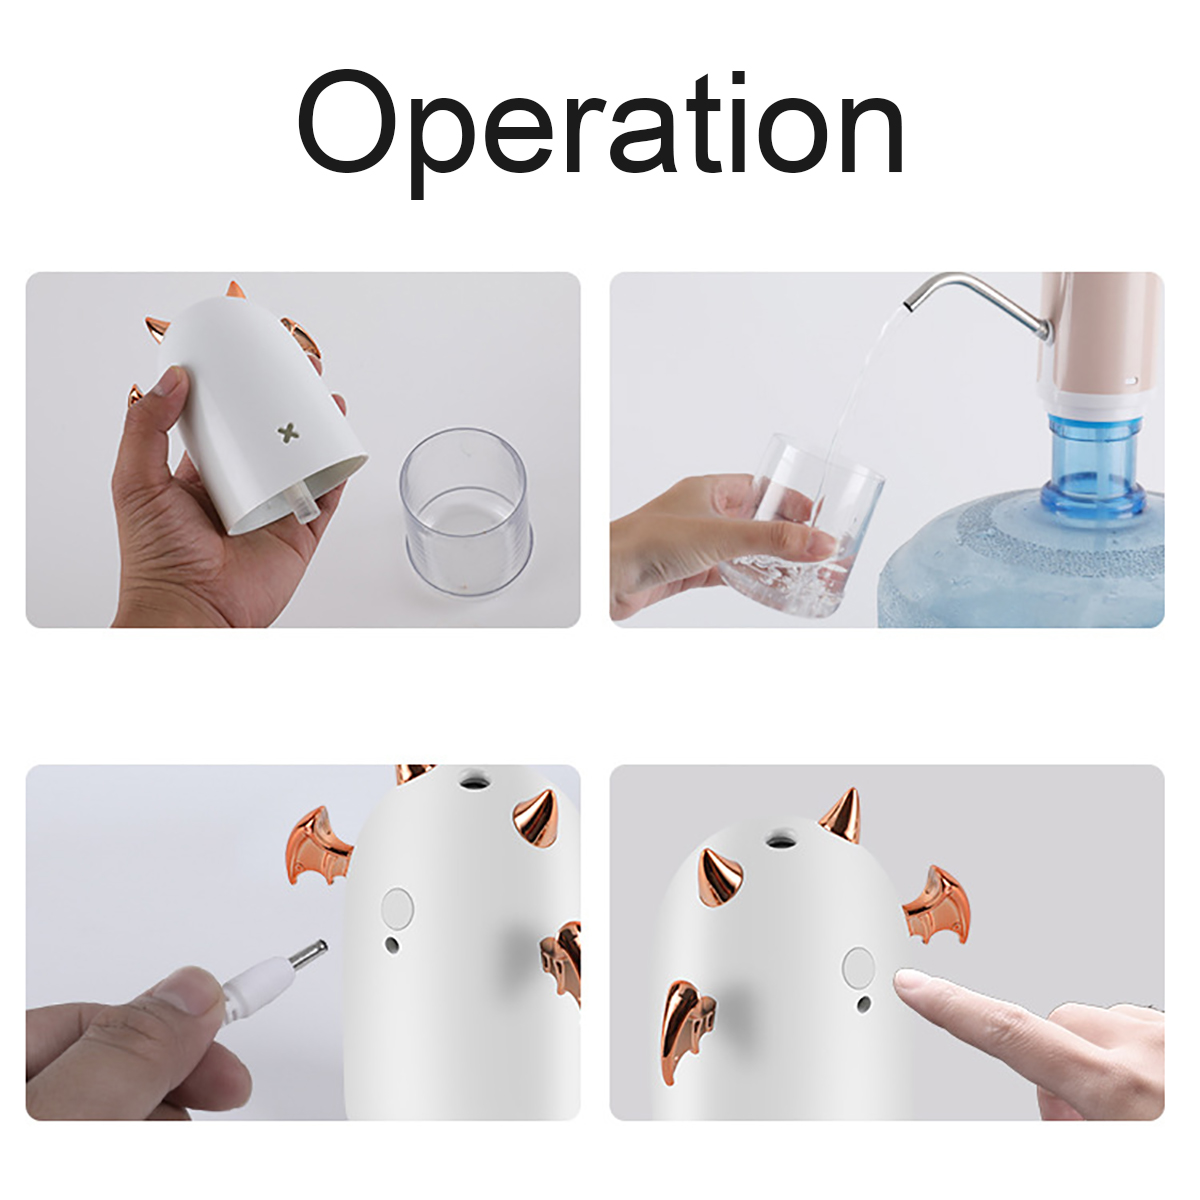 7-LED-Humidifier-USB-Purifier-Mist-Aroma-Essential-Oil-Diffuser-Halloween-Gift-1651094-10